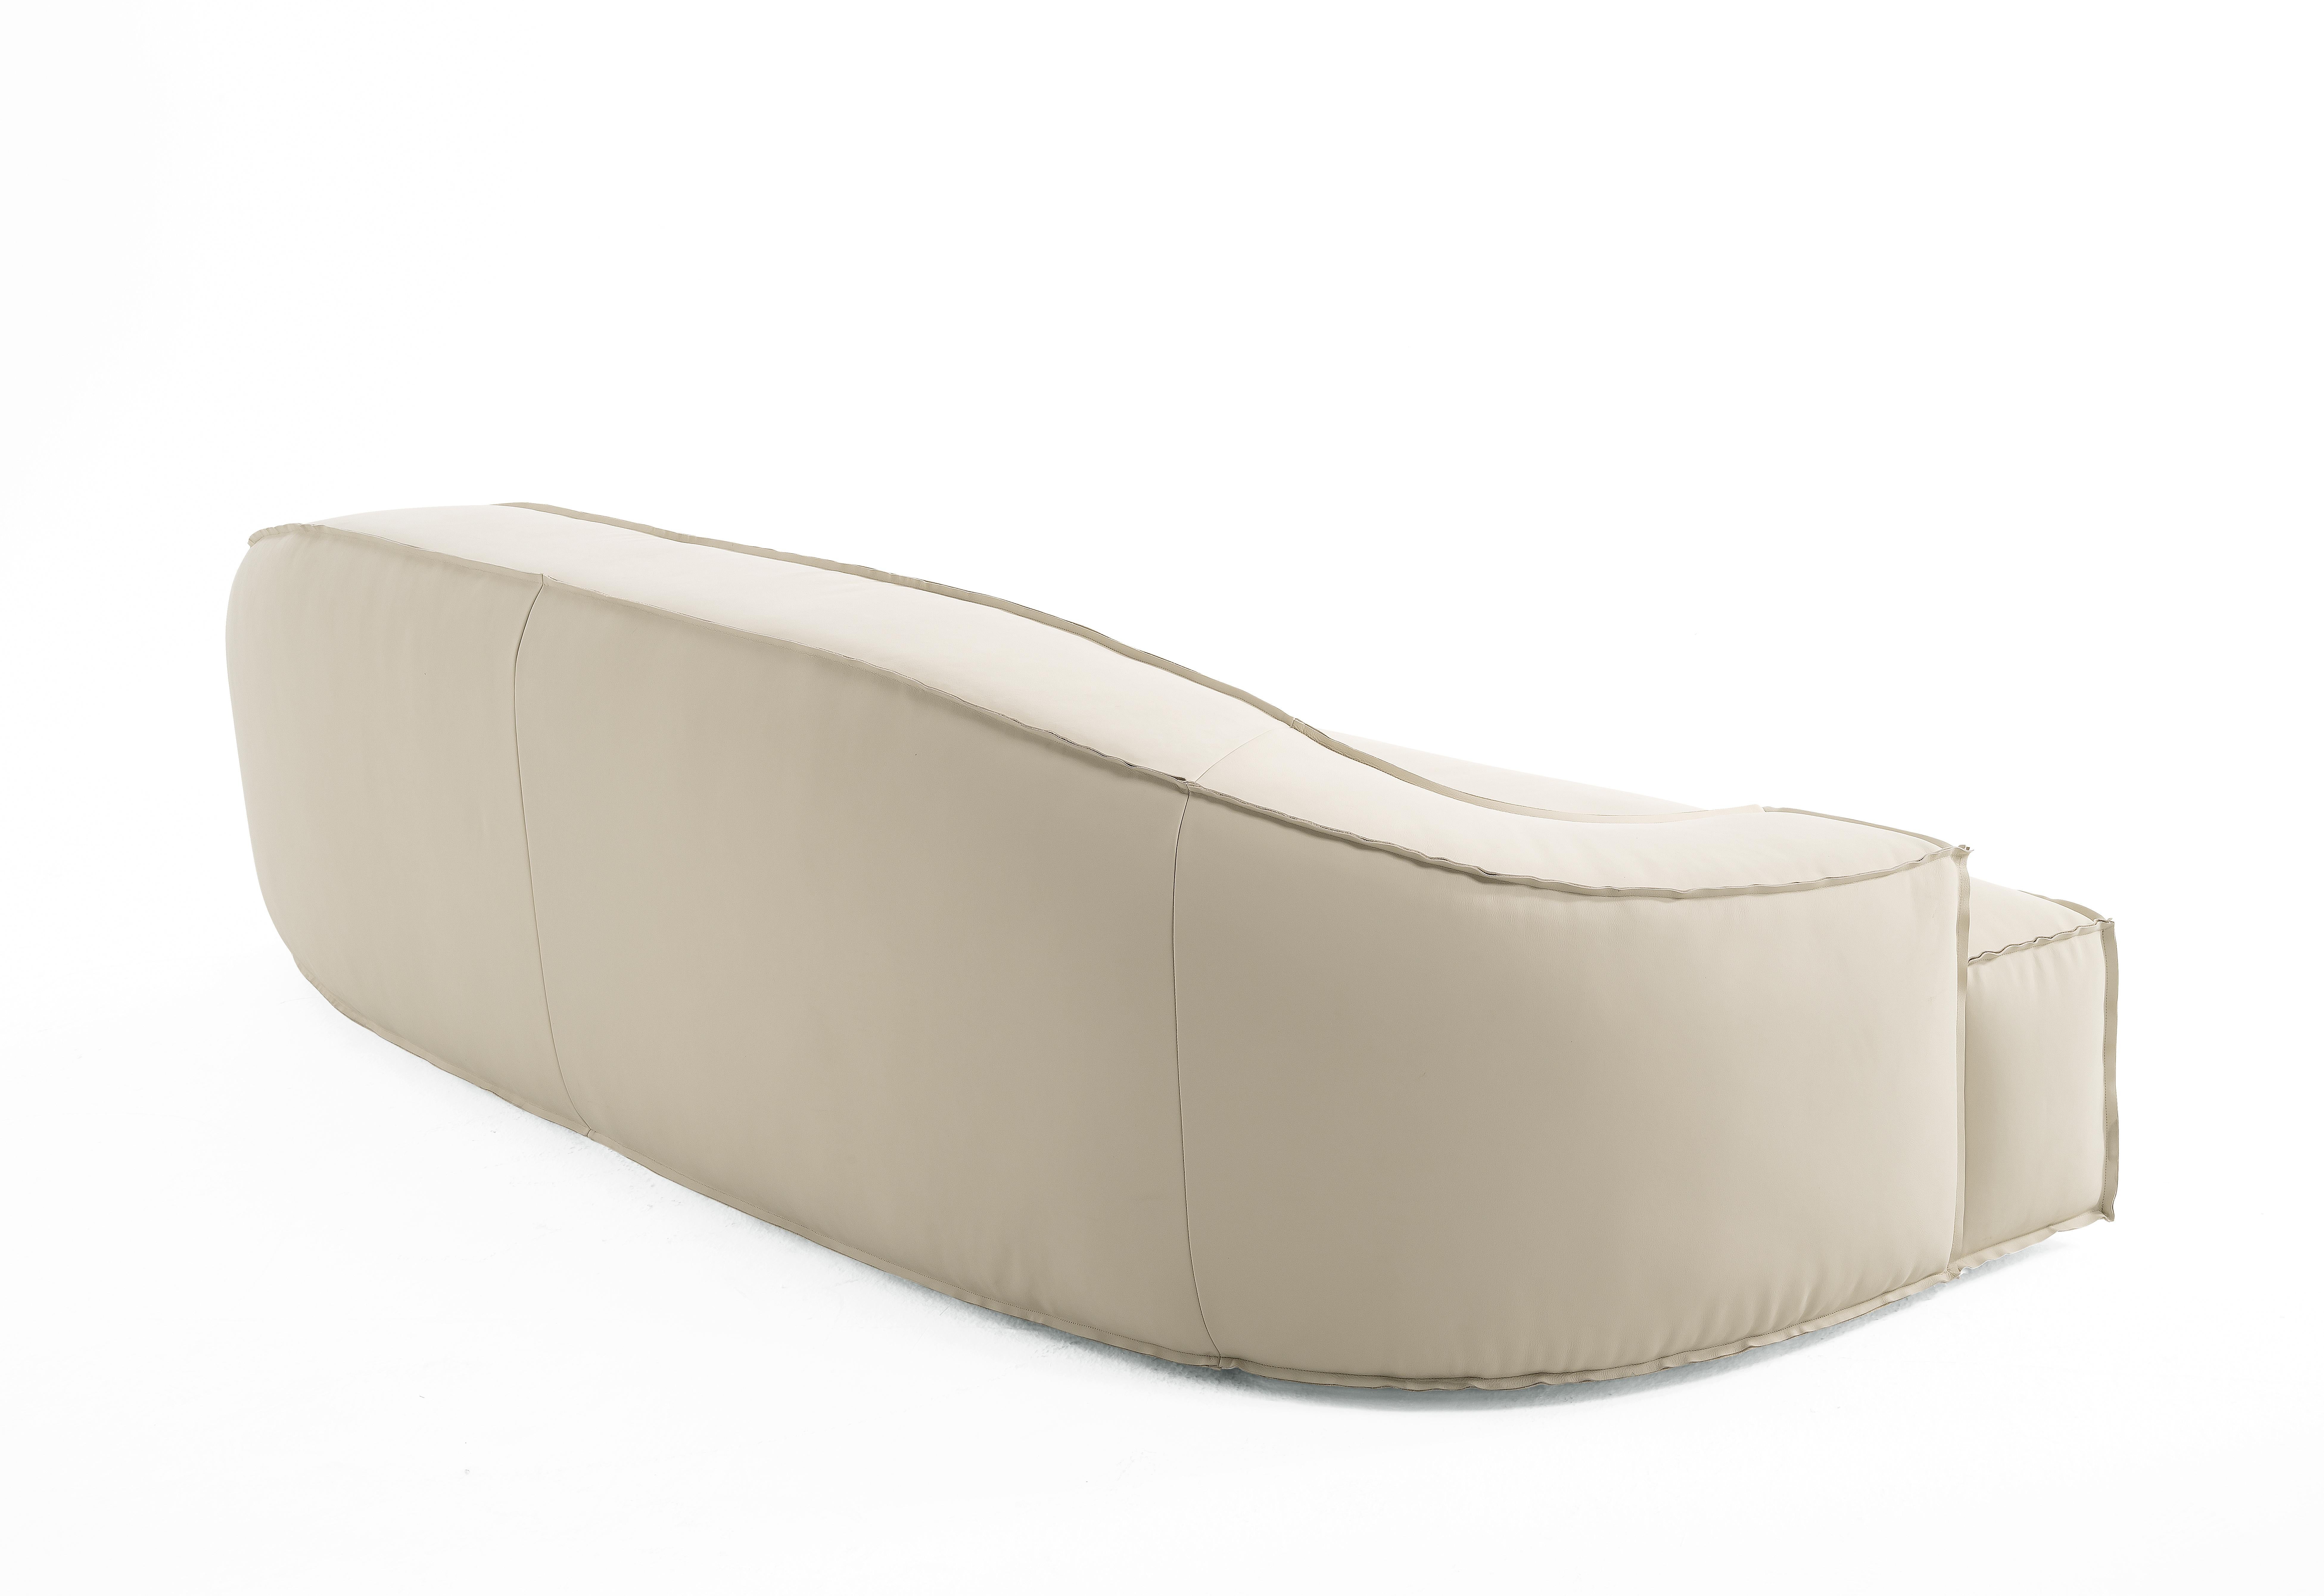 Contemporary 21st Century Assal Sofa in Leather by Roberto Cavalli Home Interiors For Sale